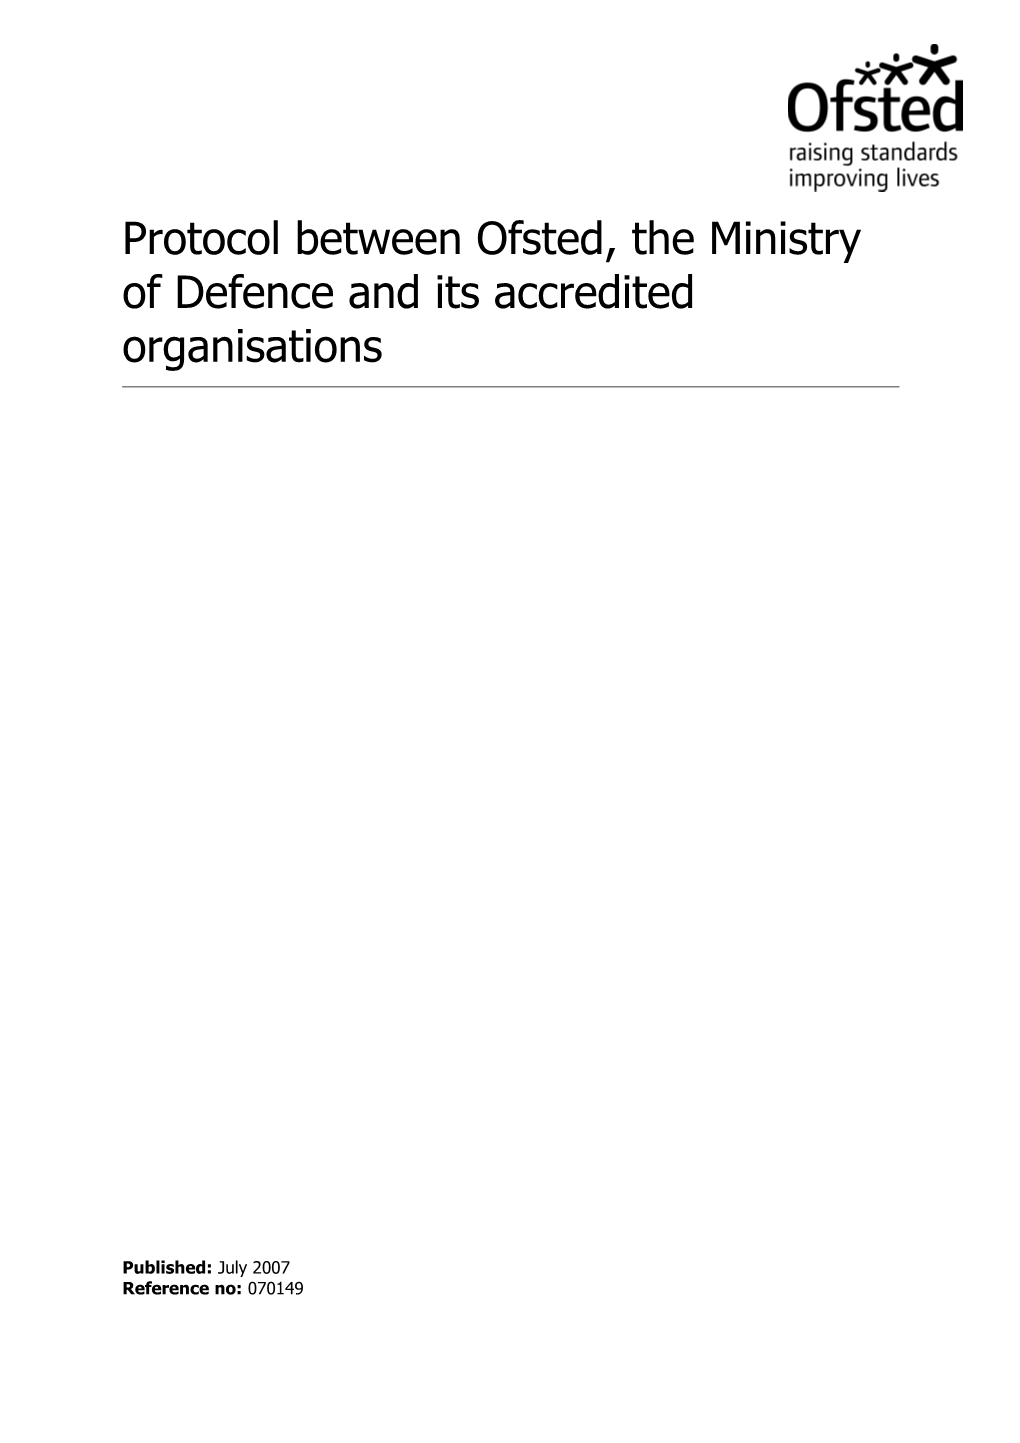 Protocol Between Ofsted, the Ministry of Defence and Its Accredited Organisations